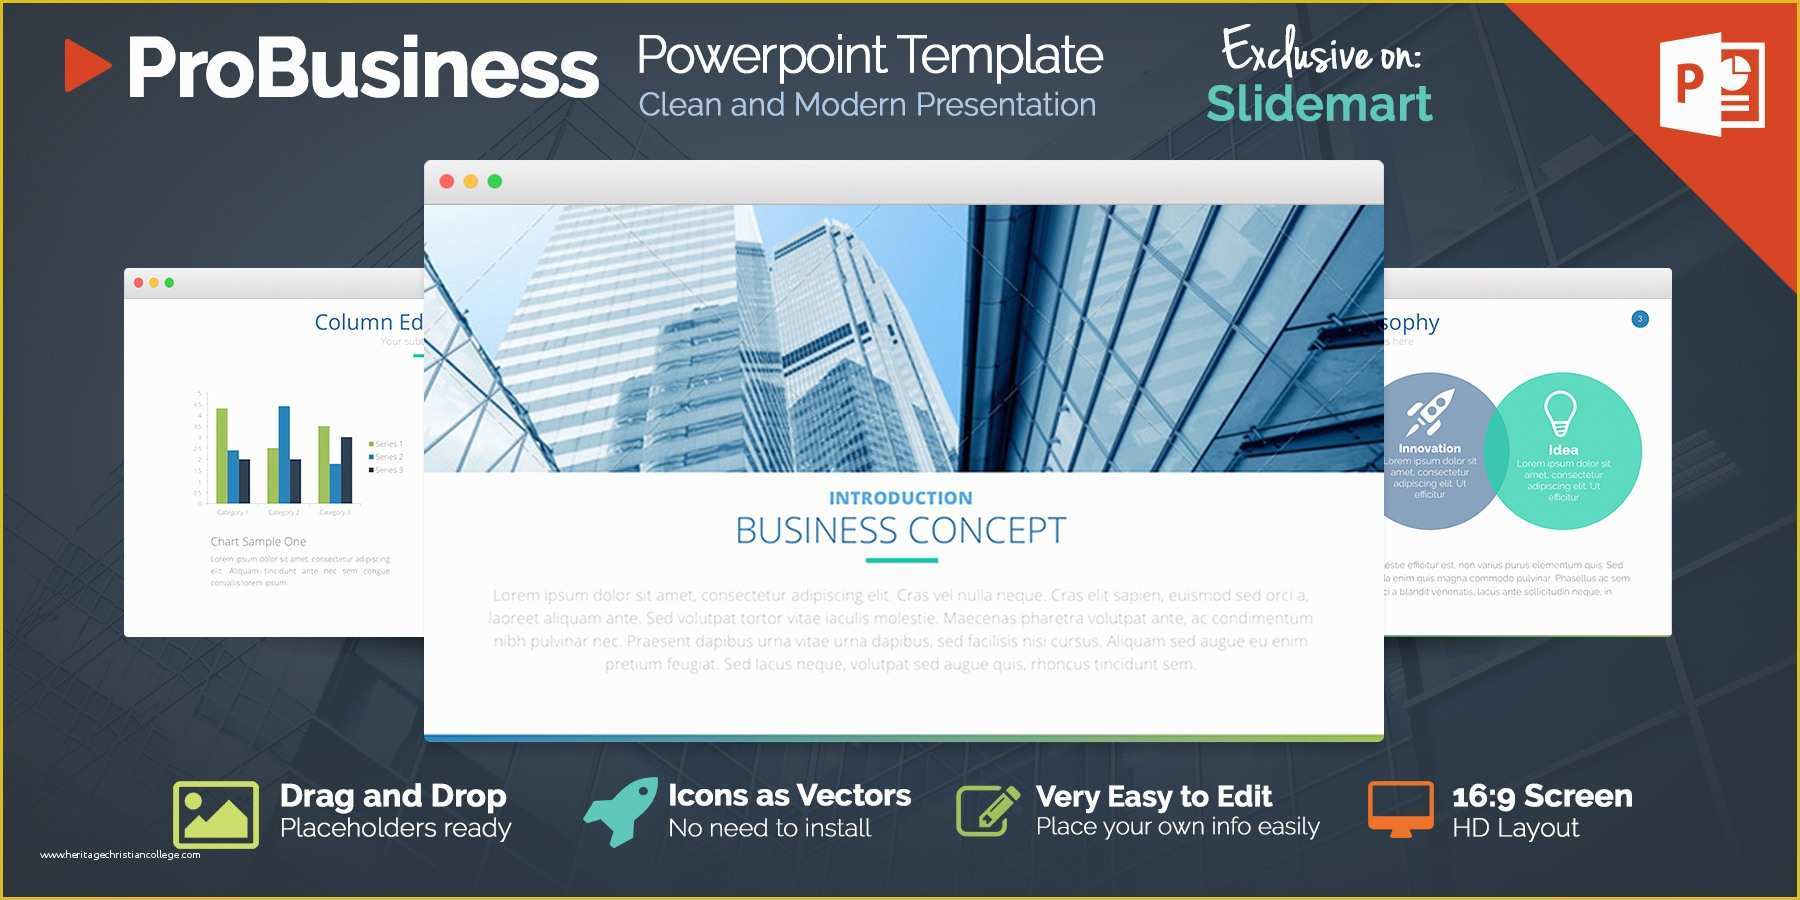 Keynote Presentation Templates Free Of the Best 8 Free Powerpoint Templates